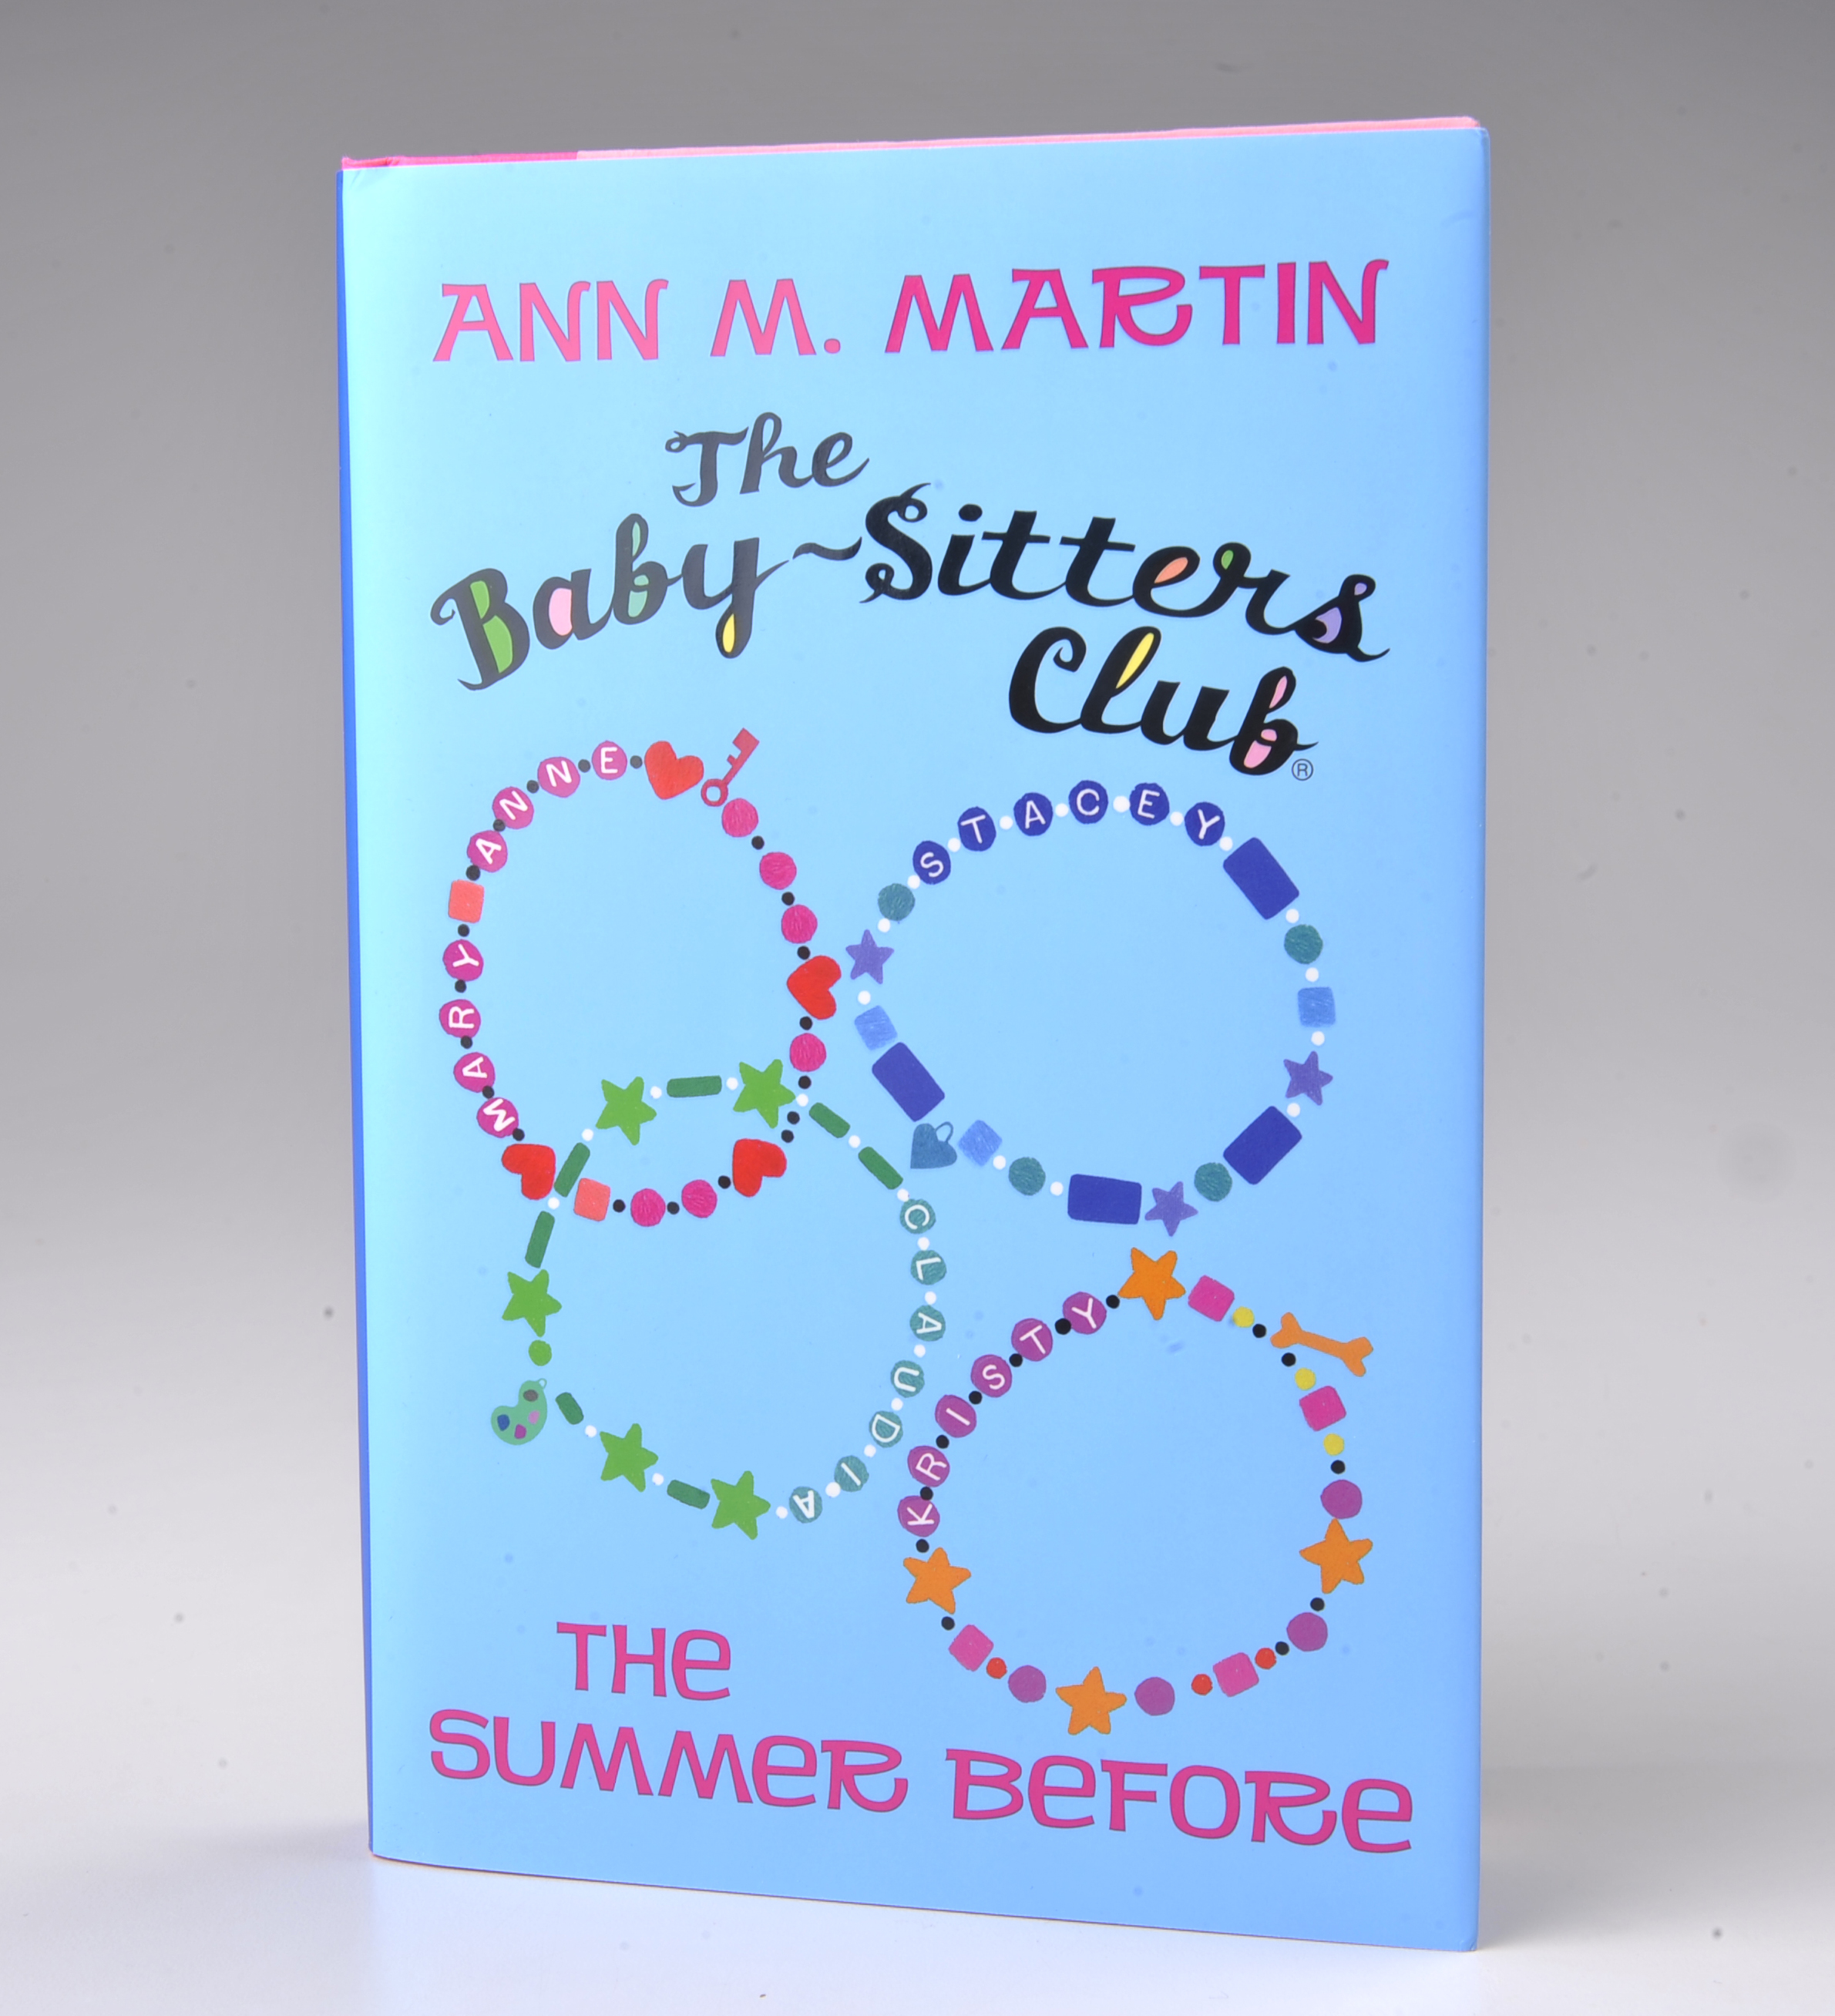 The Baby-Sitters Club-The Summer Before "  by Ann M. Martin on June 09, 2010 in Washington DC. (Mark Gail—The Washington Post/Getty Images)